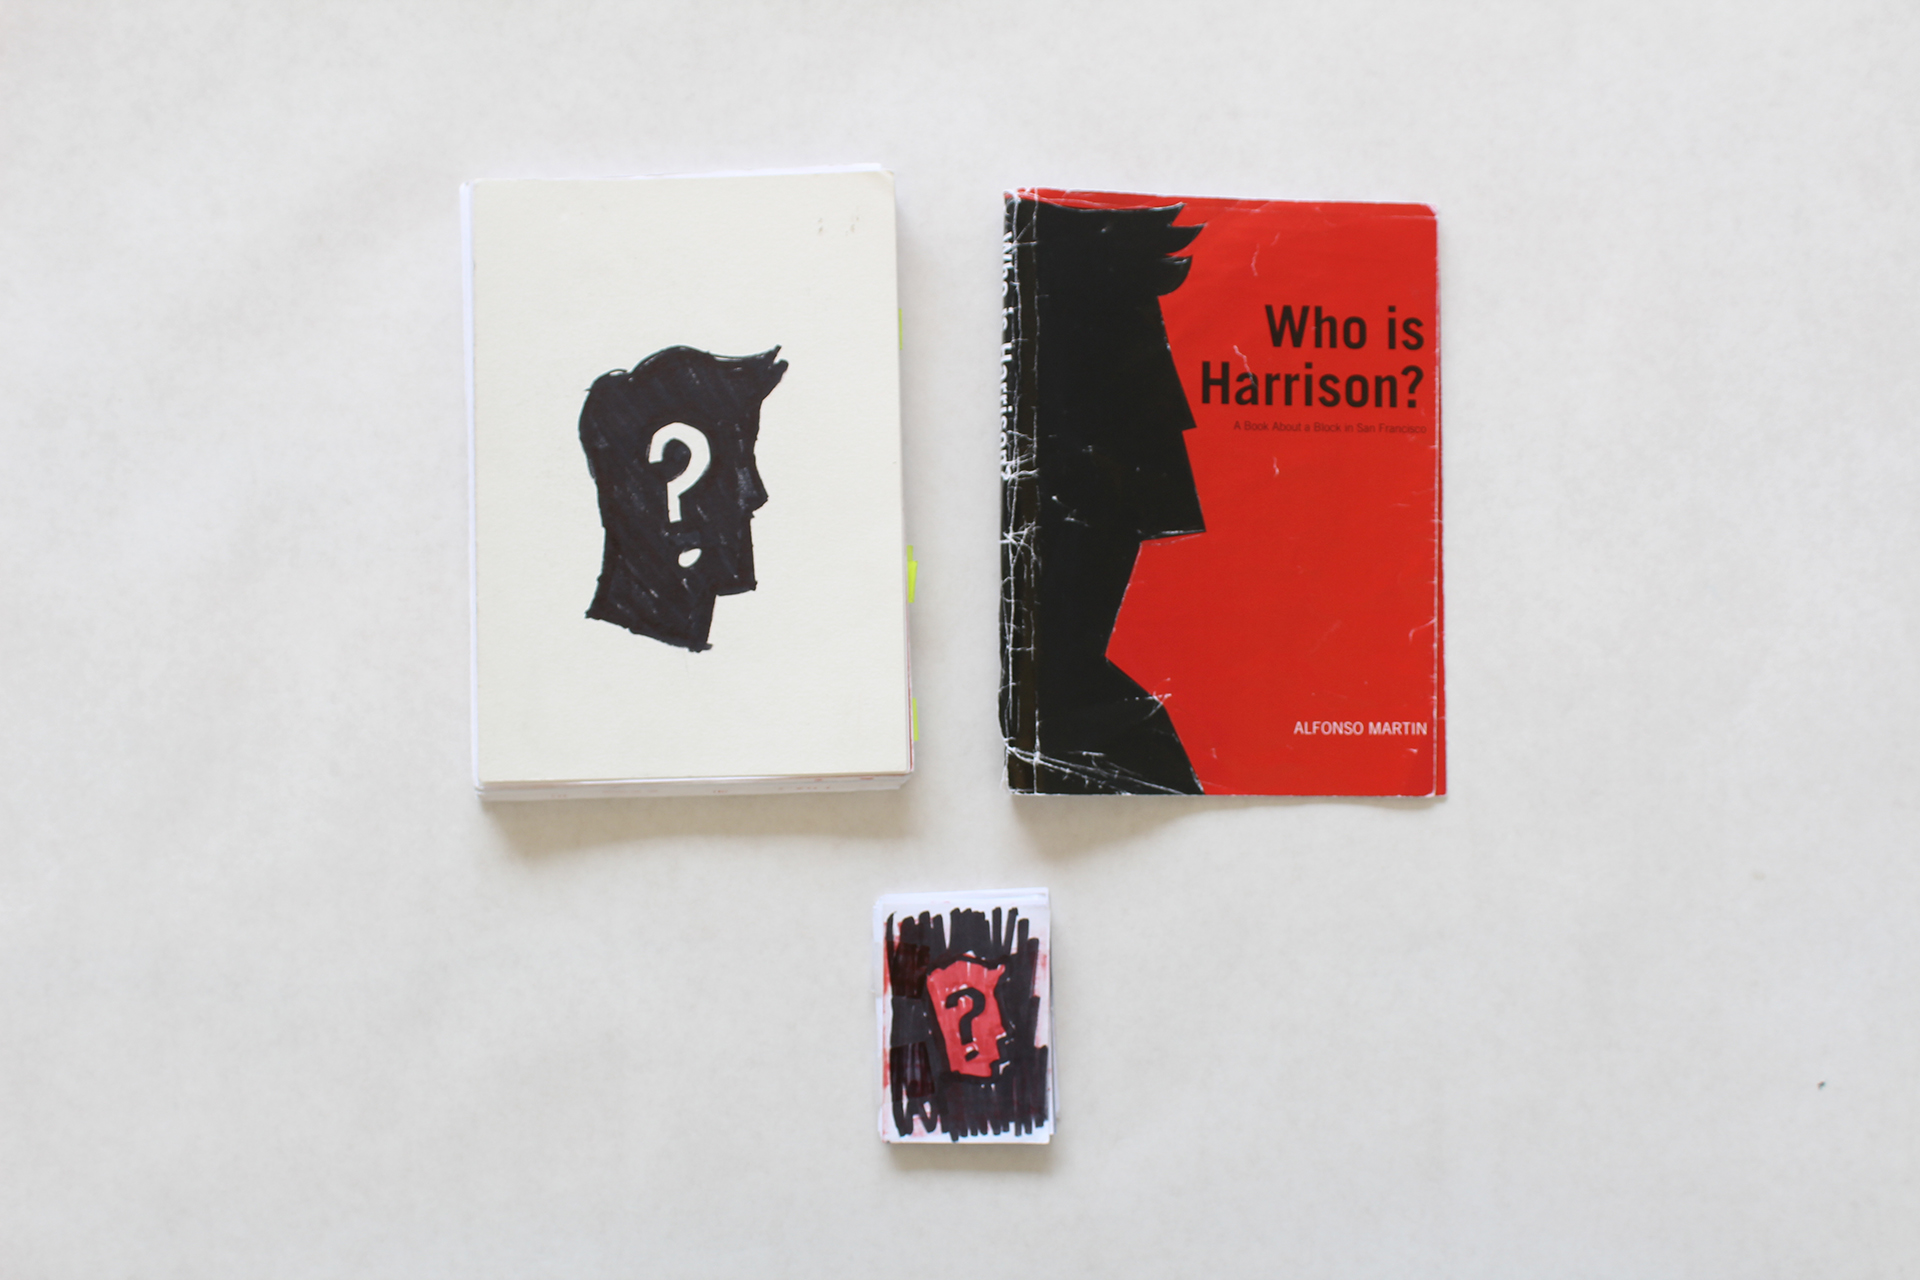 Initial prototypes of the book and book jacket